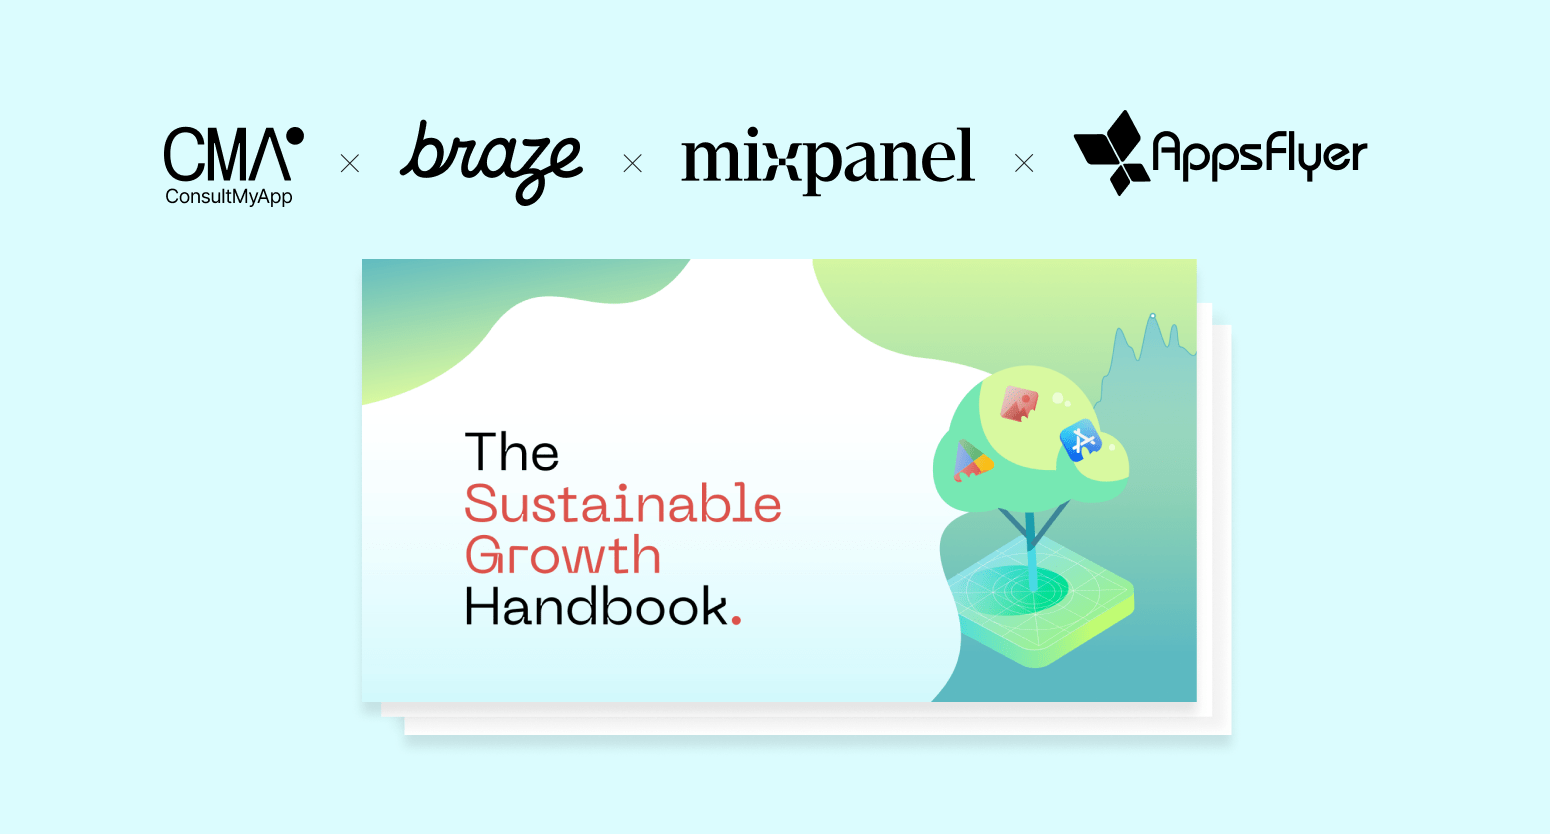 Launch of the Sustainable Growth Handbook: The New Blueprint for Mobile App Growth